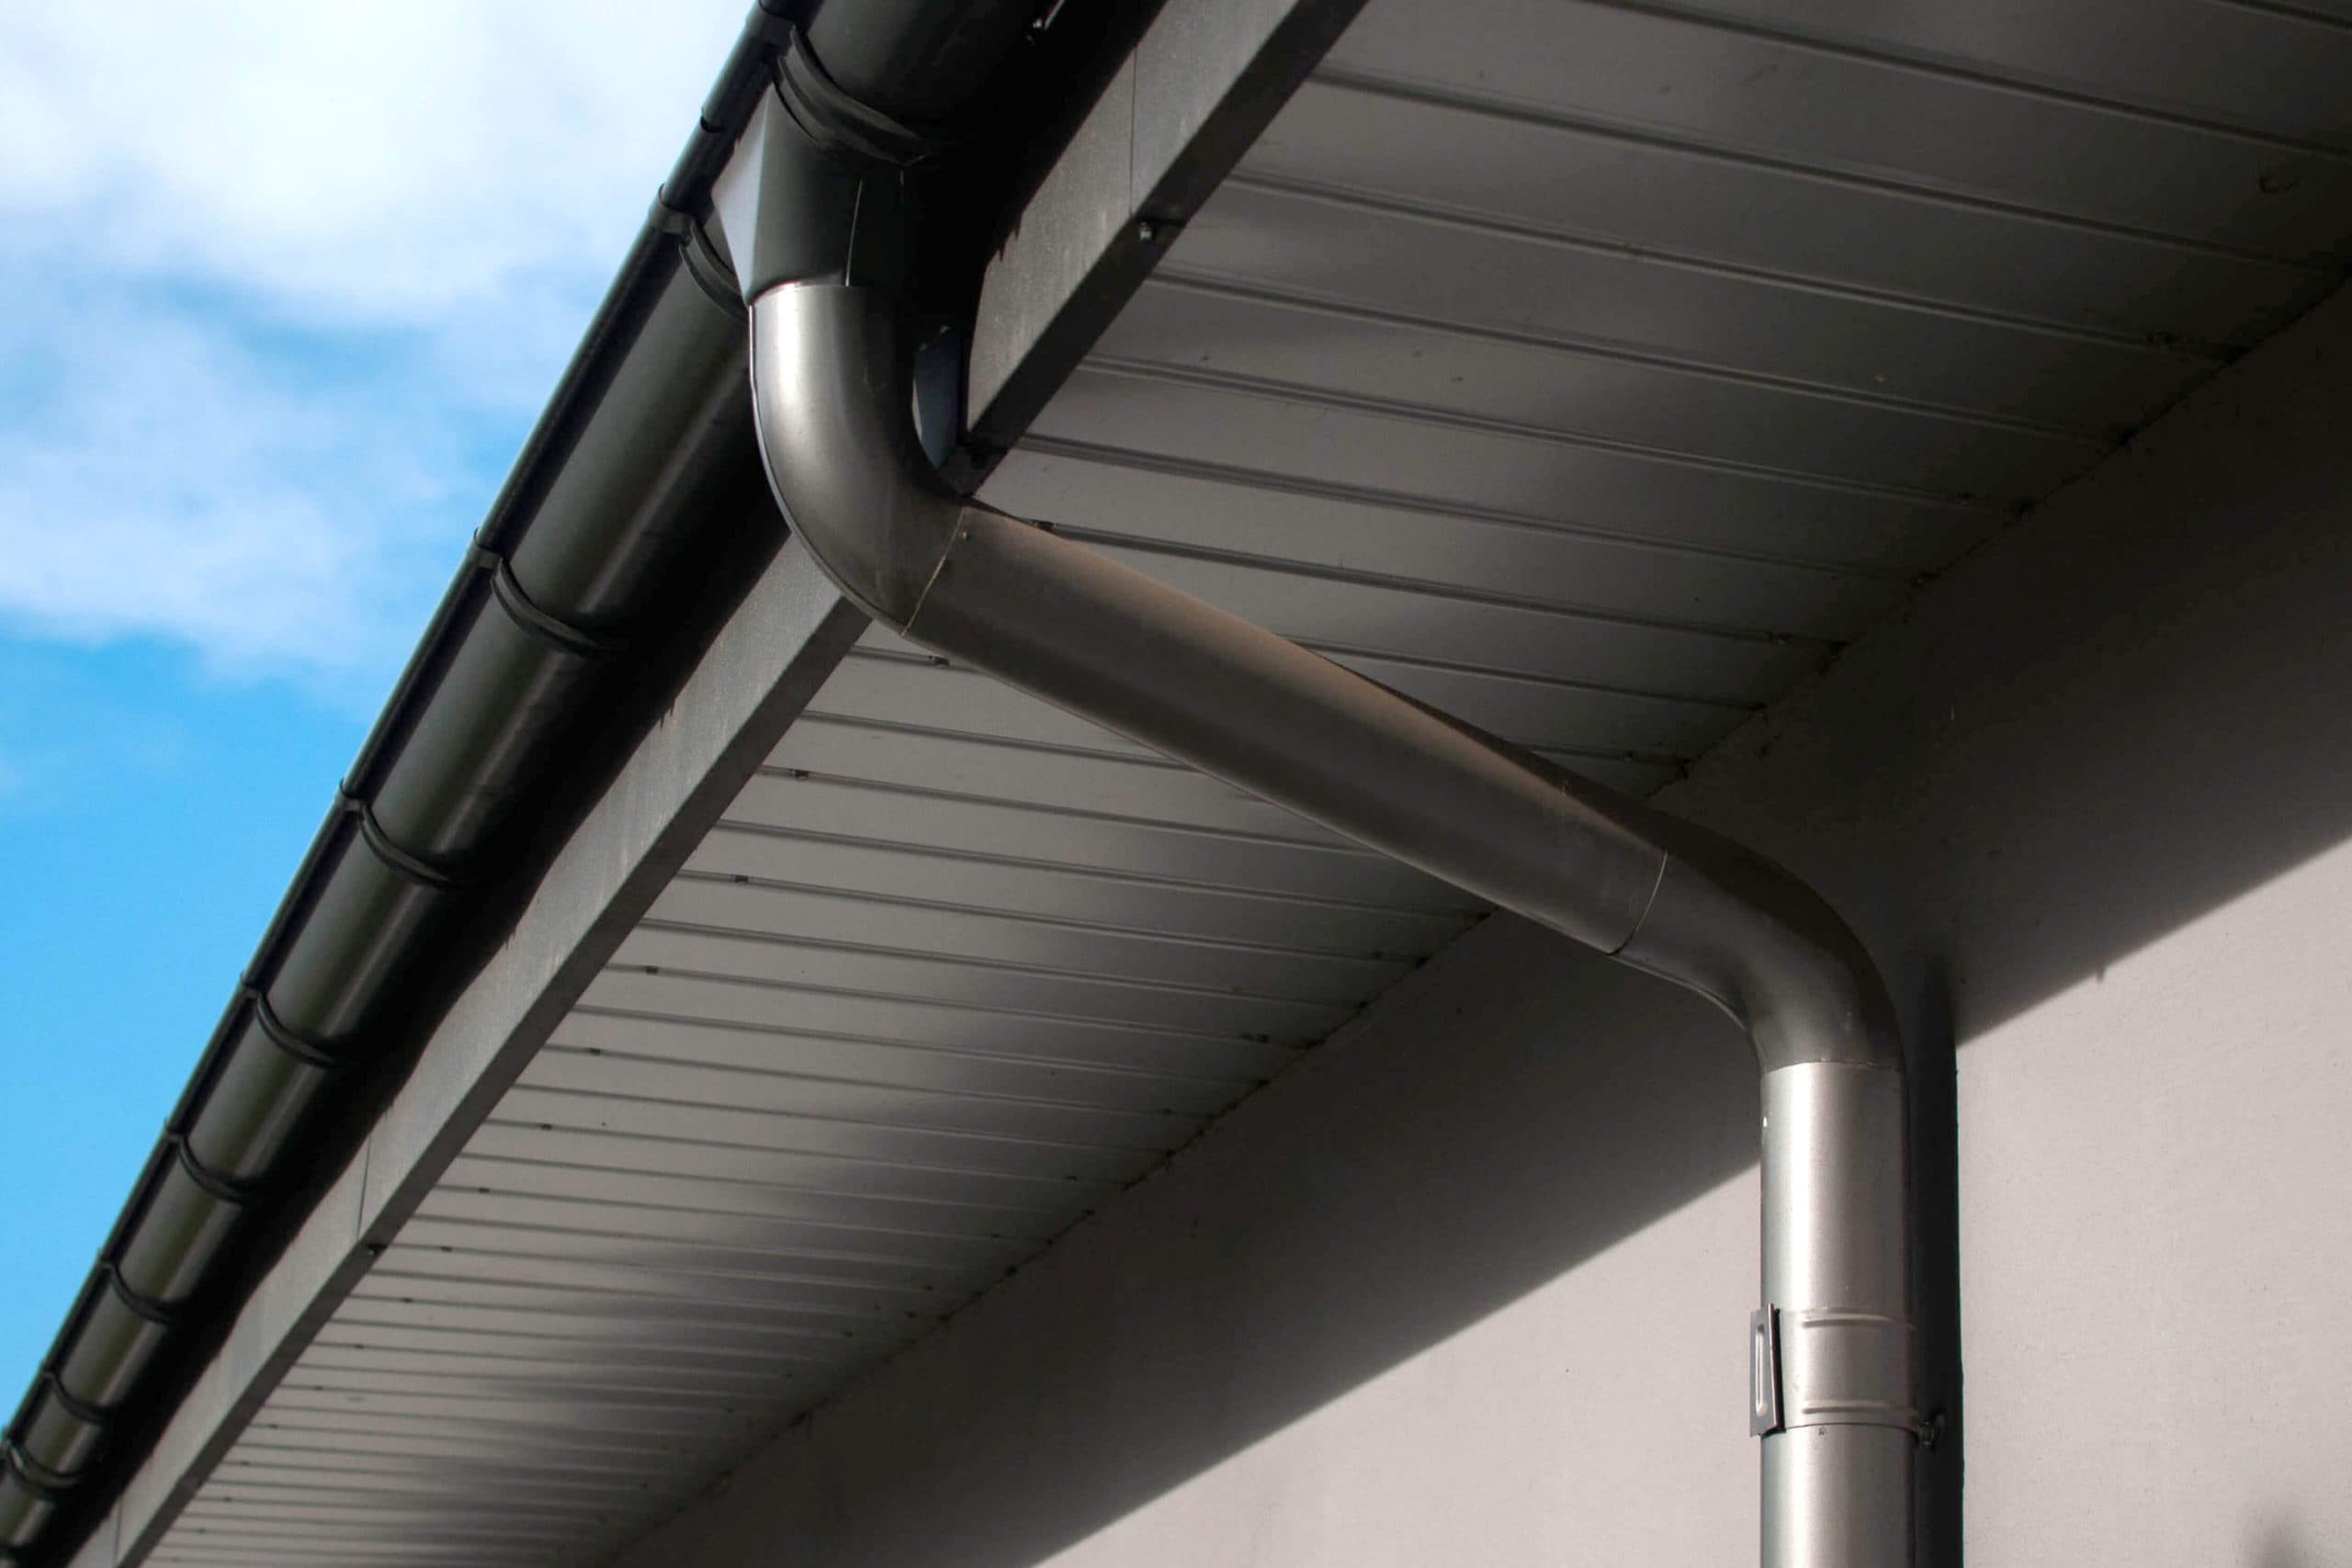 Reliable and affordable Galvanized gutters installation in Carrollton